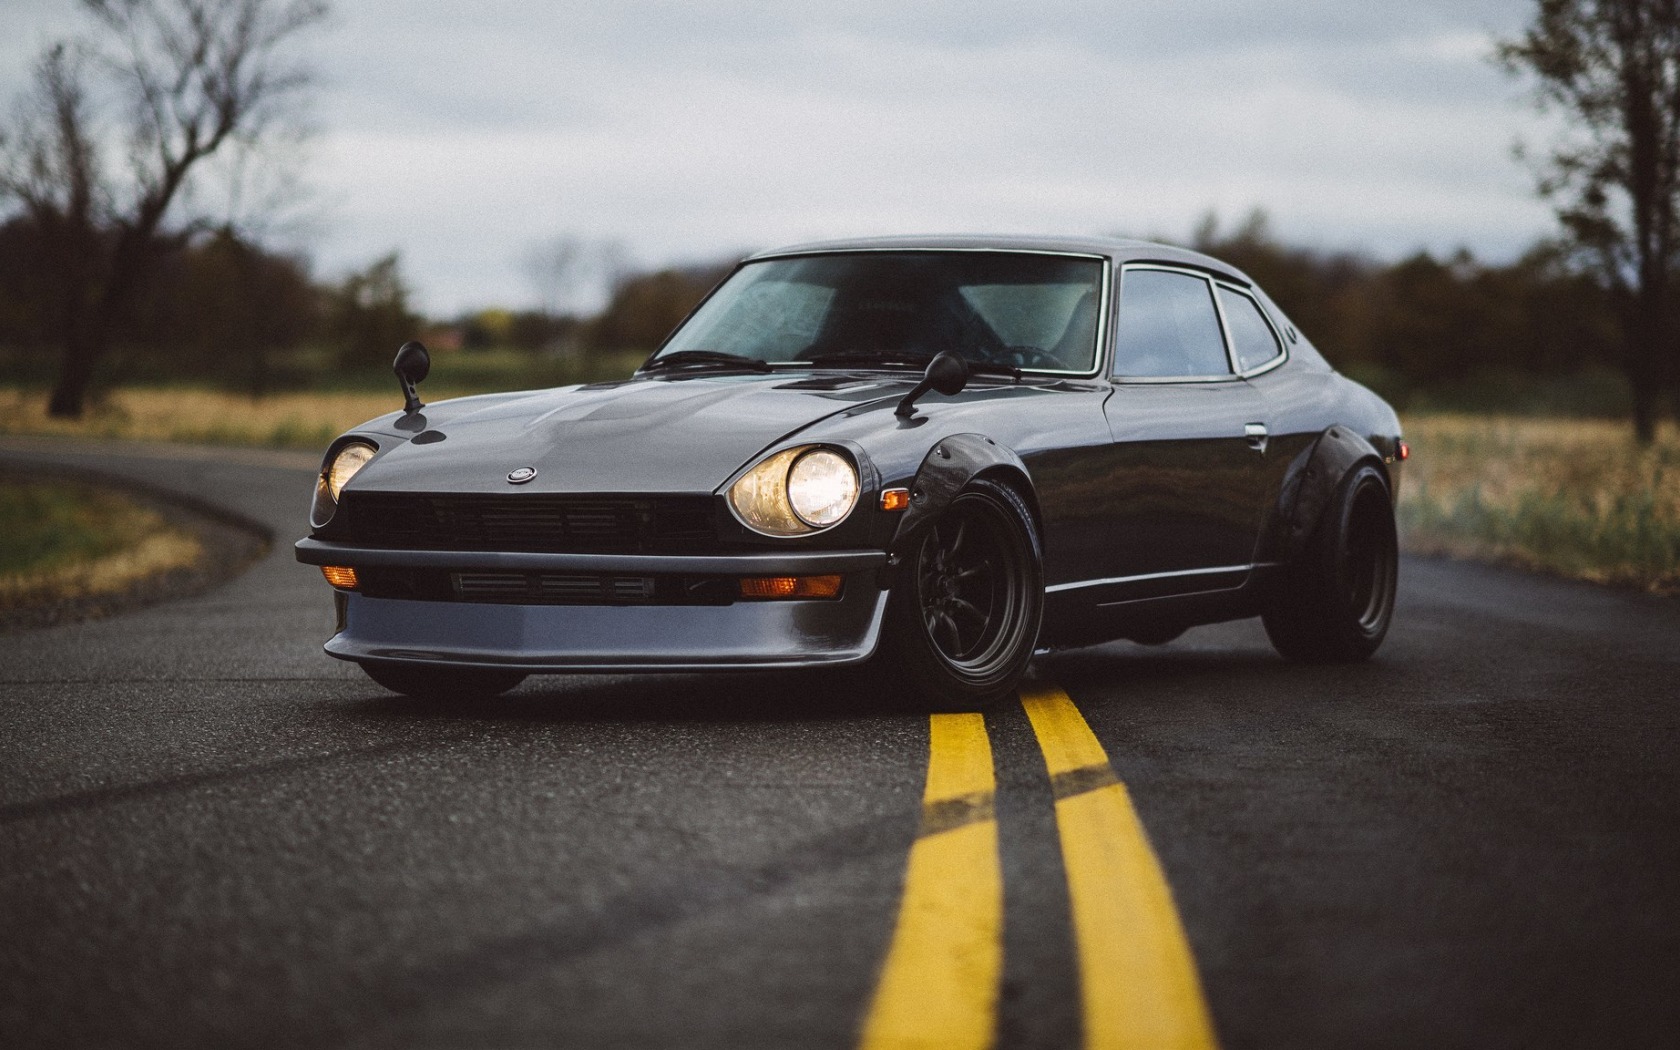 Nissan S30 Wallpaper High Resolution And Quality